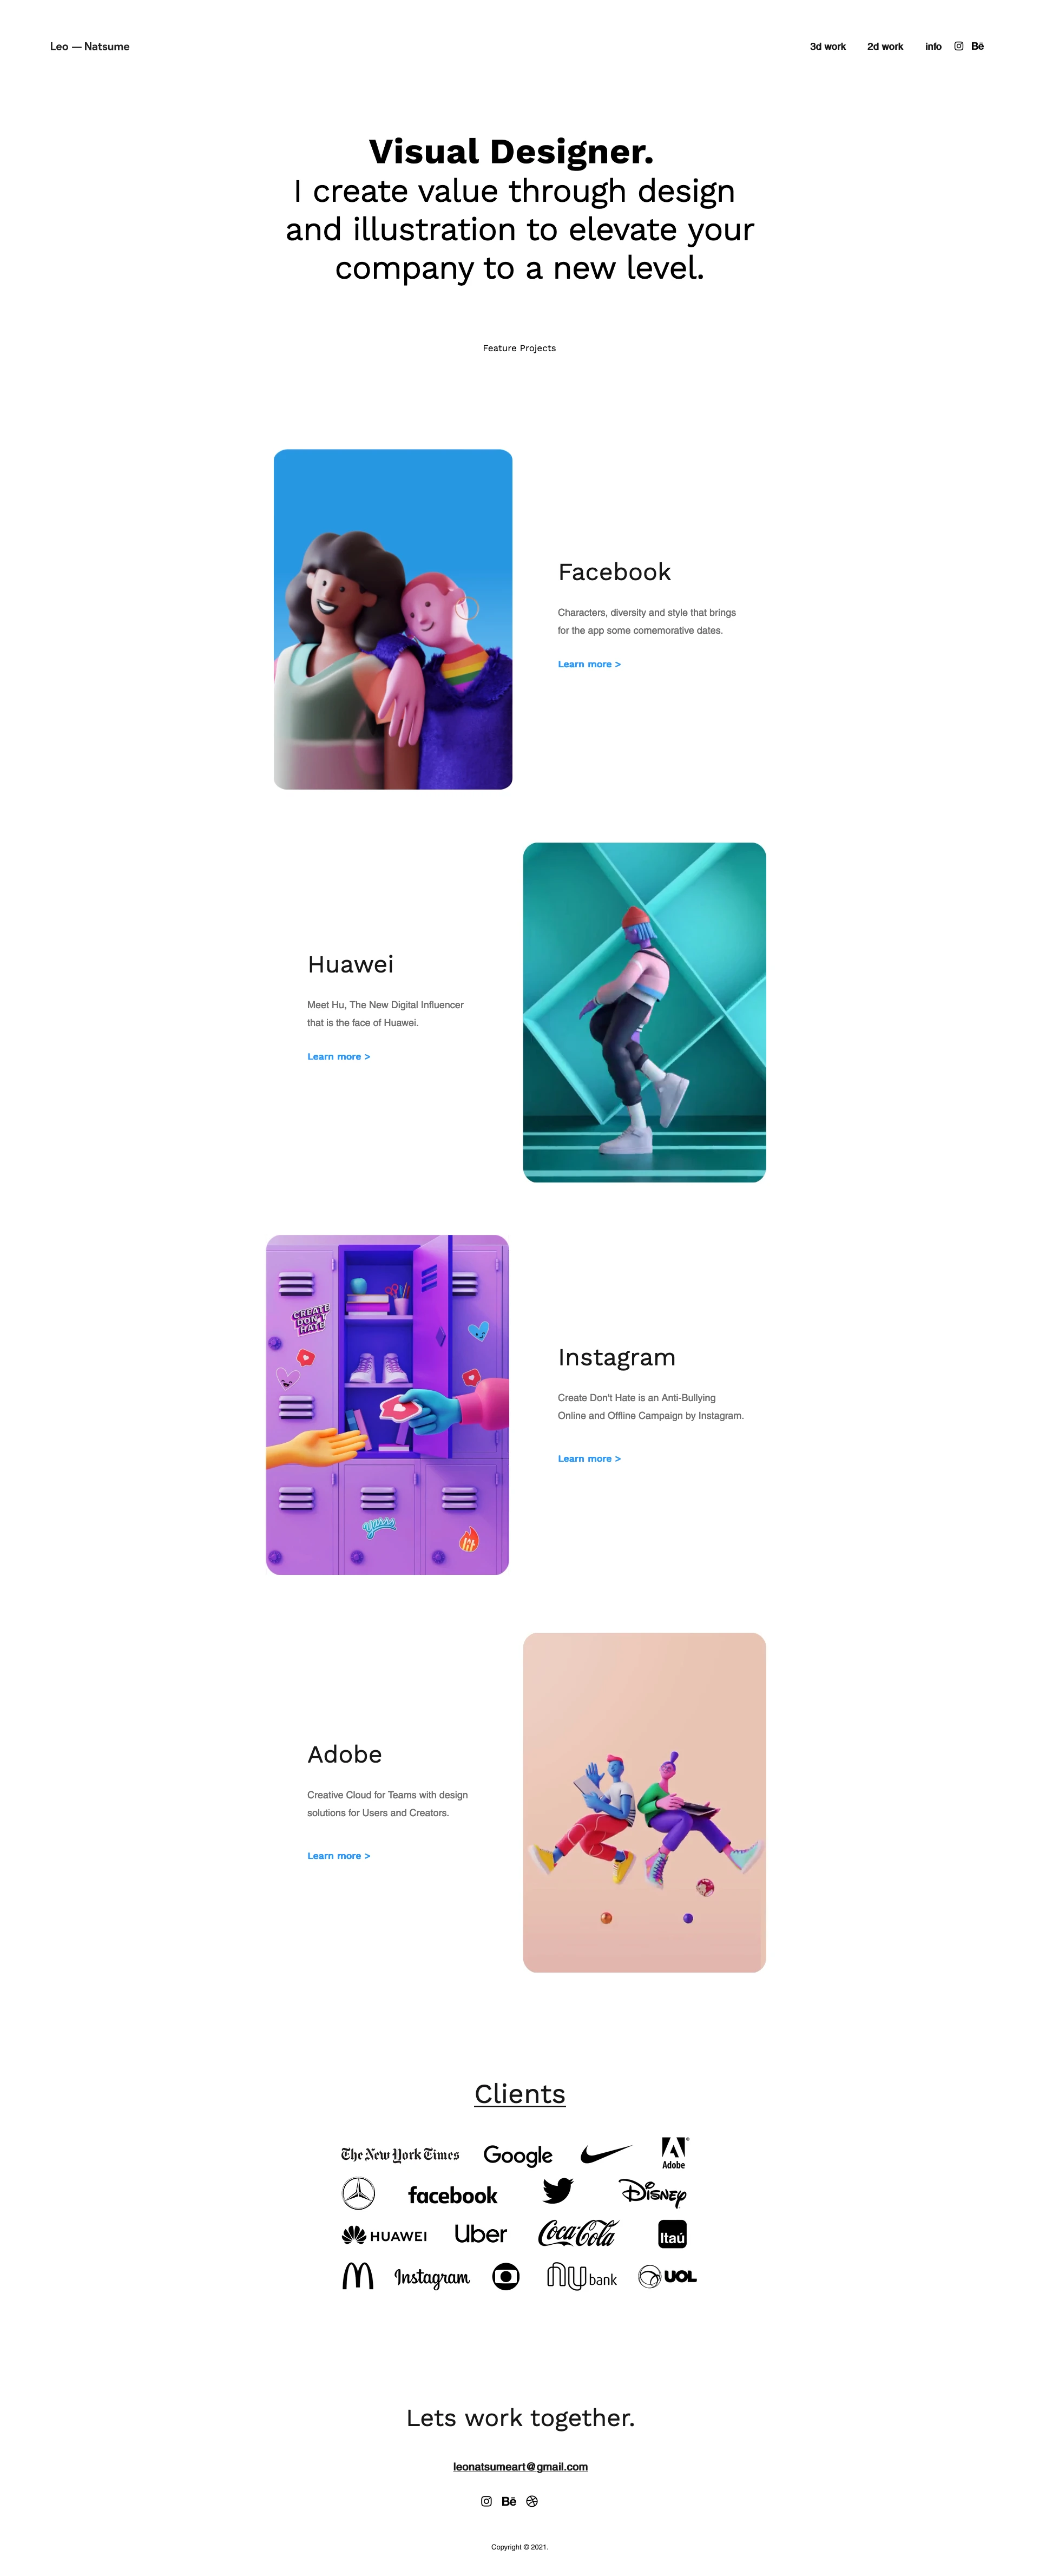 Leo Natsume Landing Page Example: I create value through design and illustration to elevate your company to a new level.